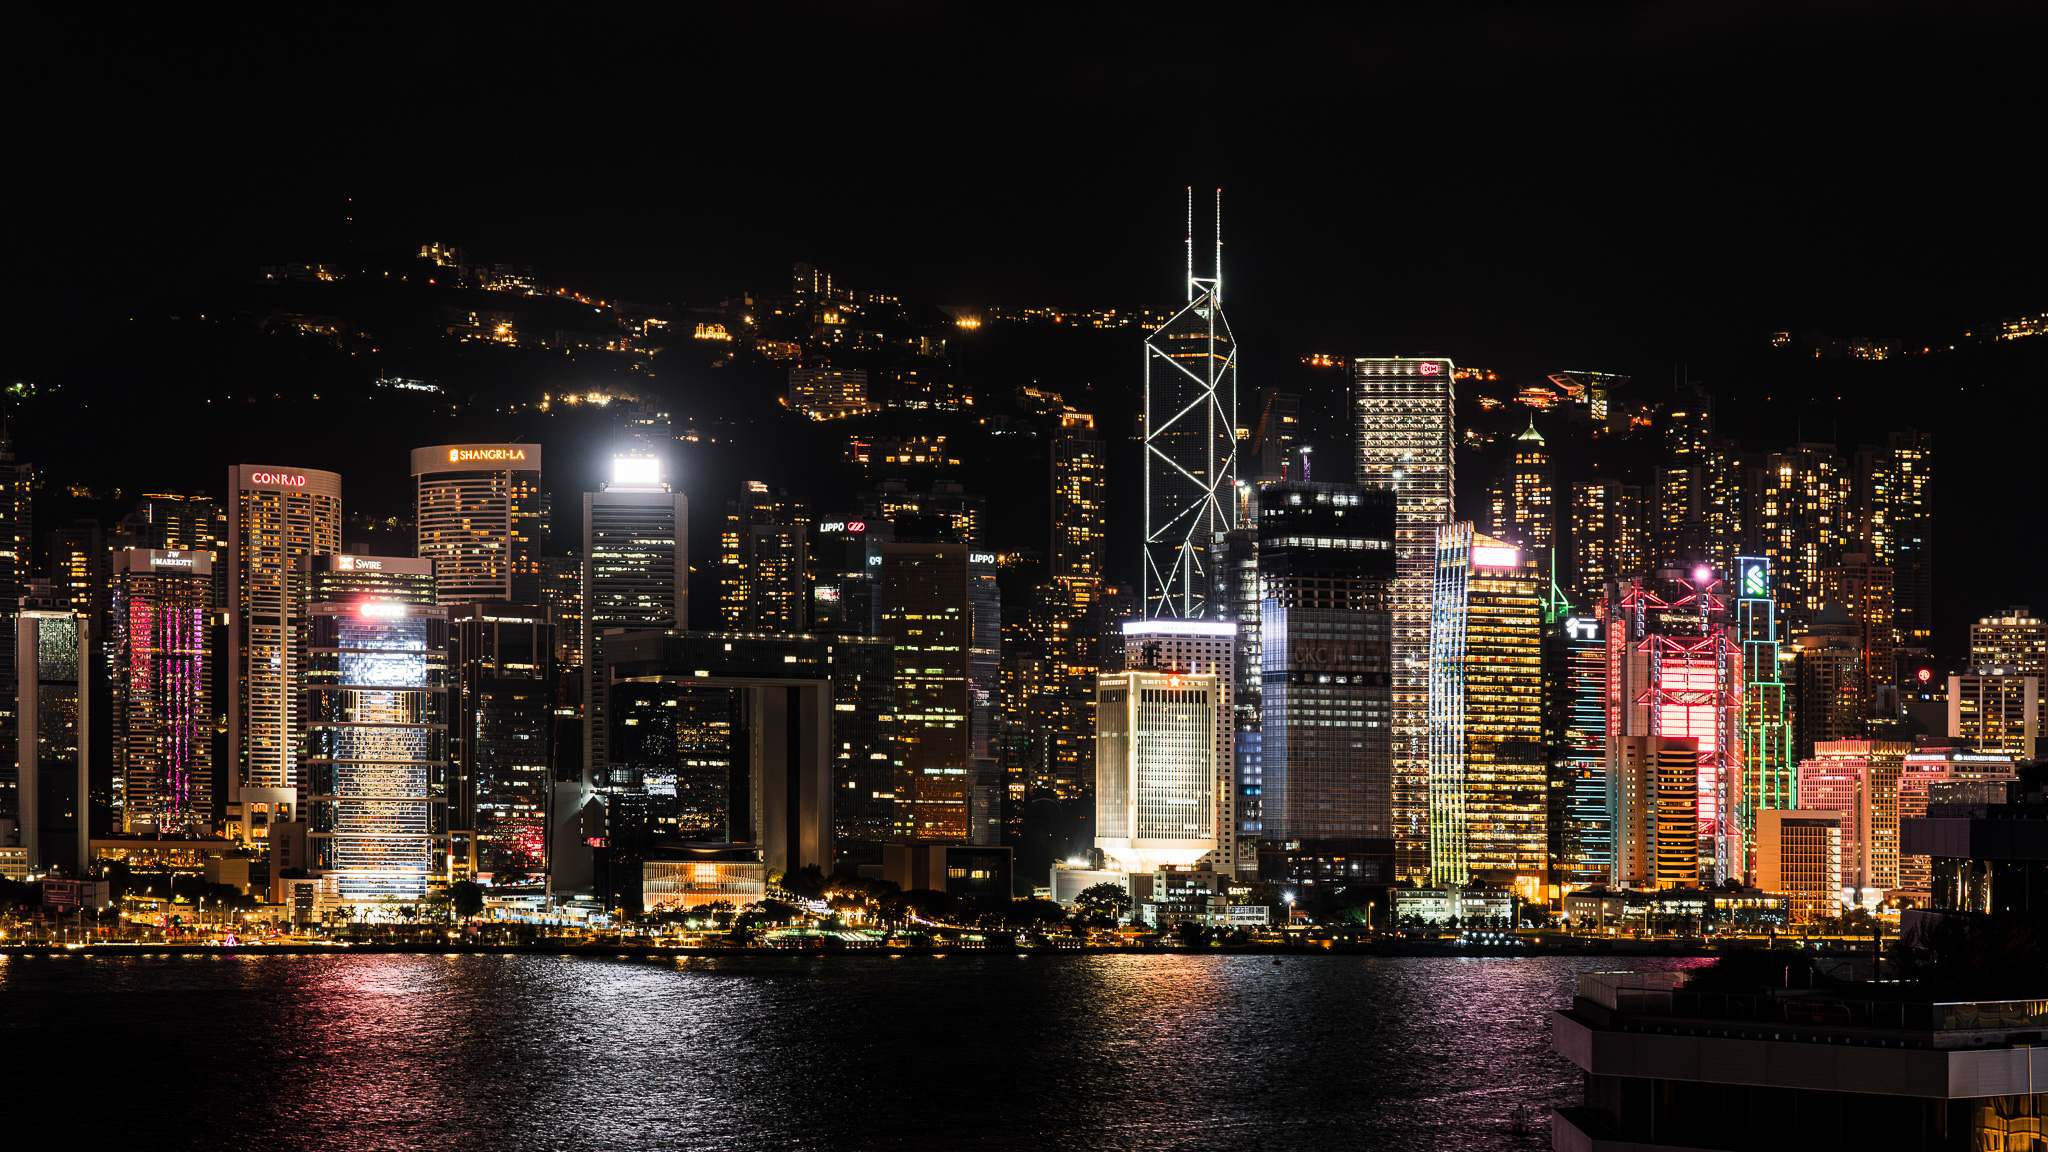 Victoria Harbour, FE 70-200mm F2.8 GM OSS on Alpha 7R III, 70mm, F8, 1/5s, ISO 3200